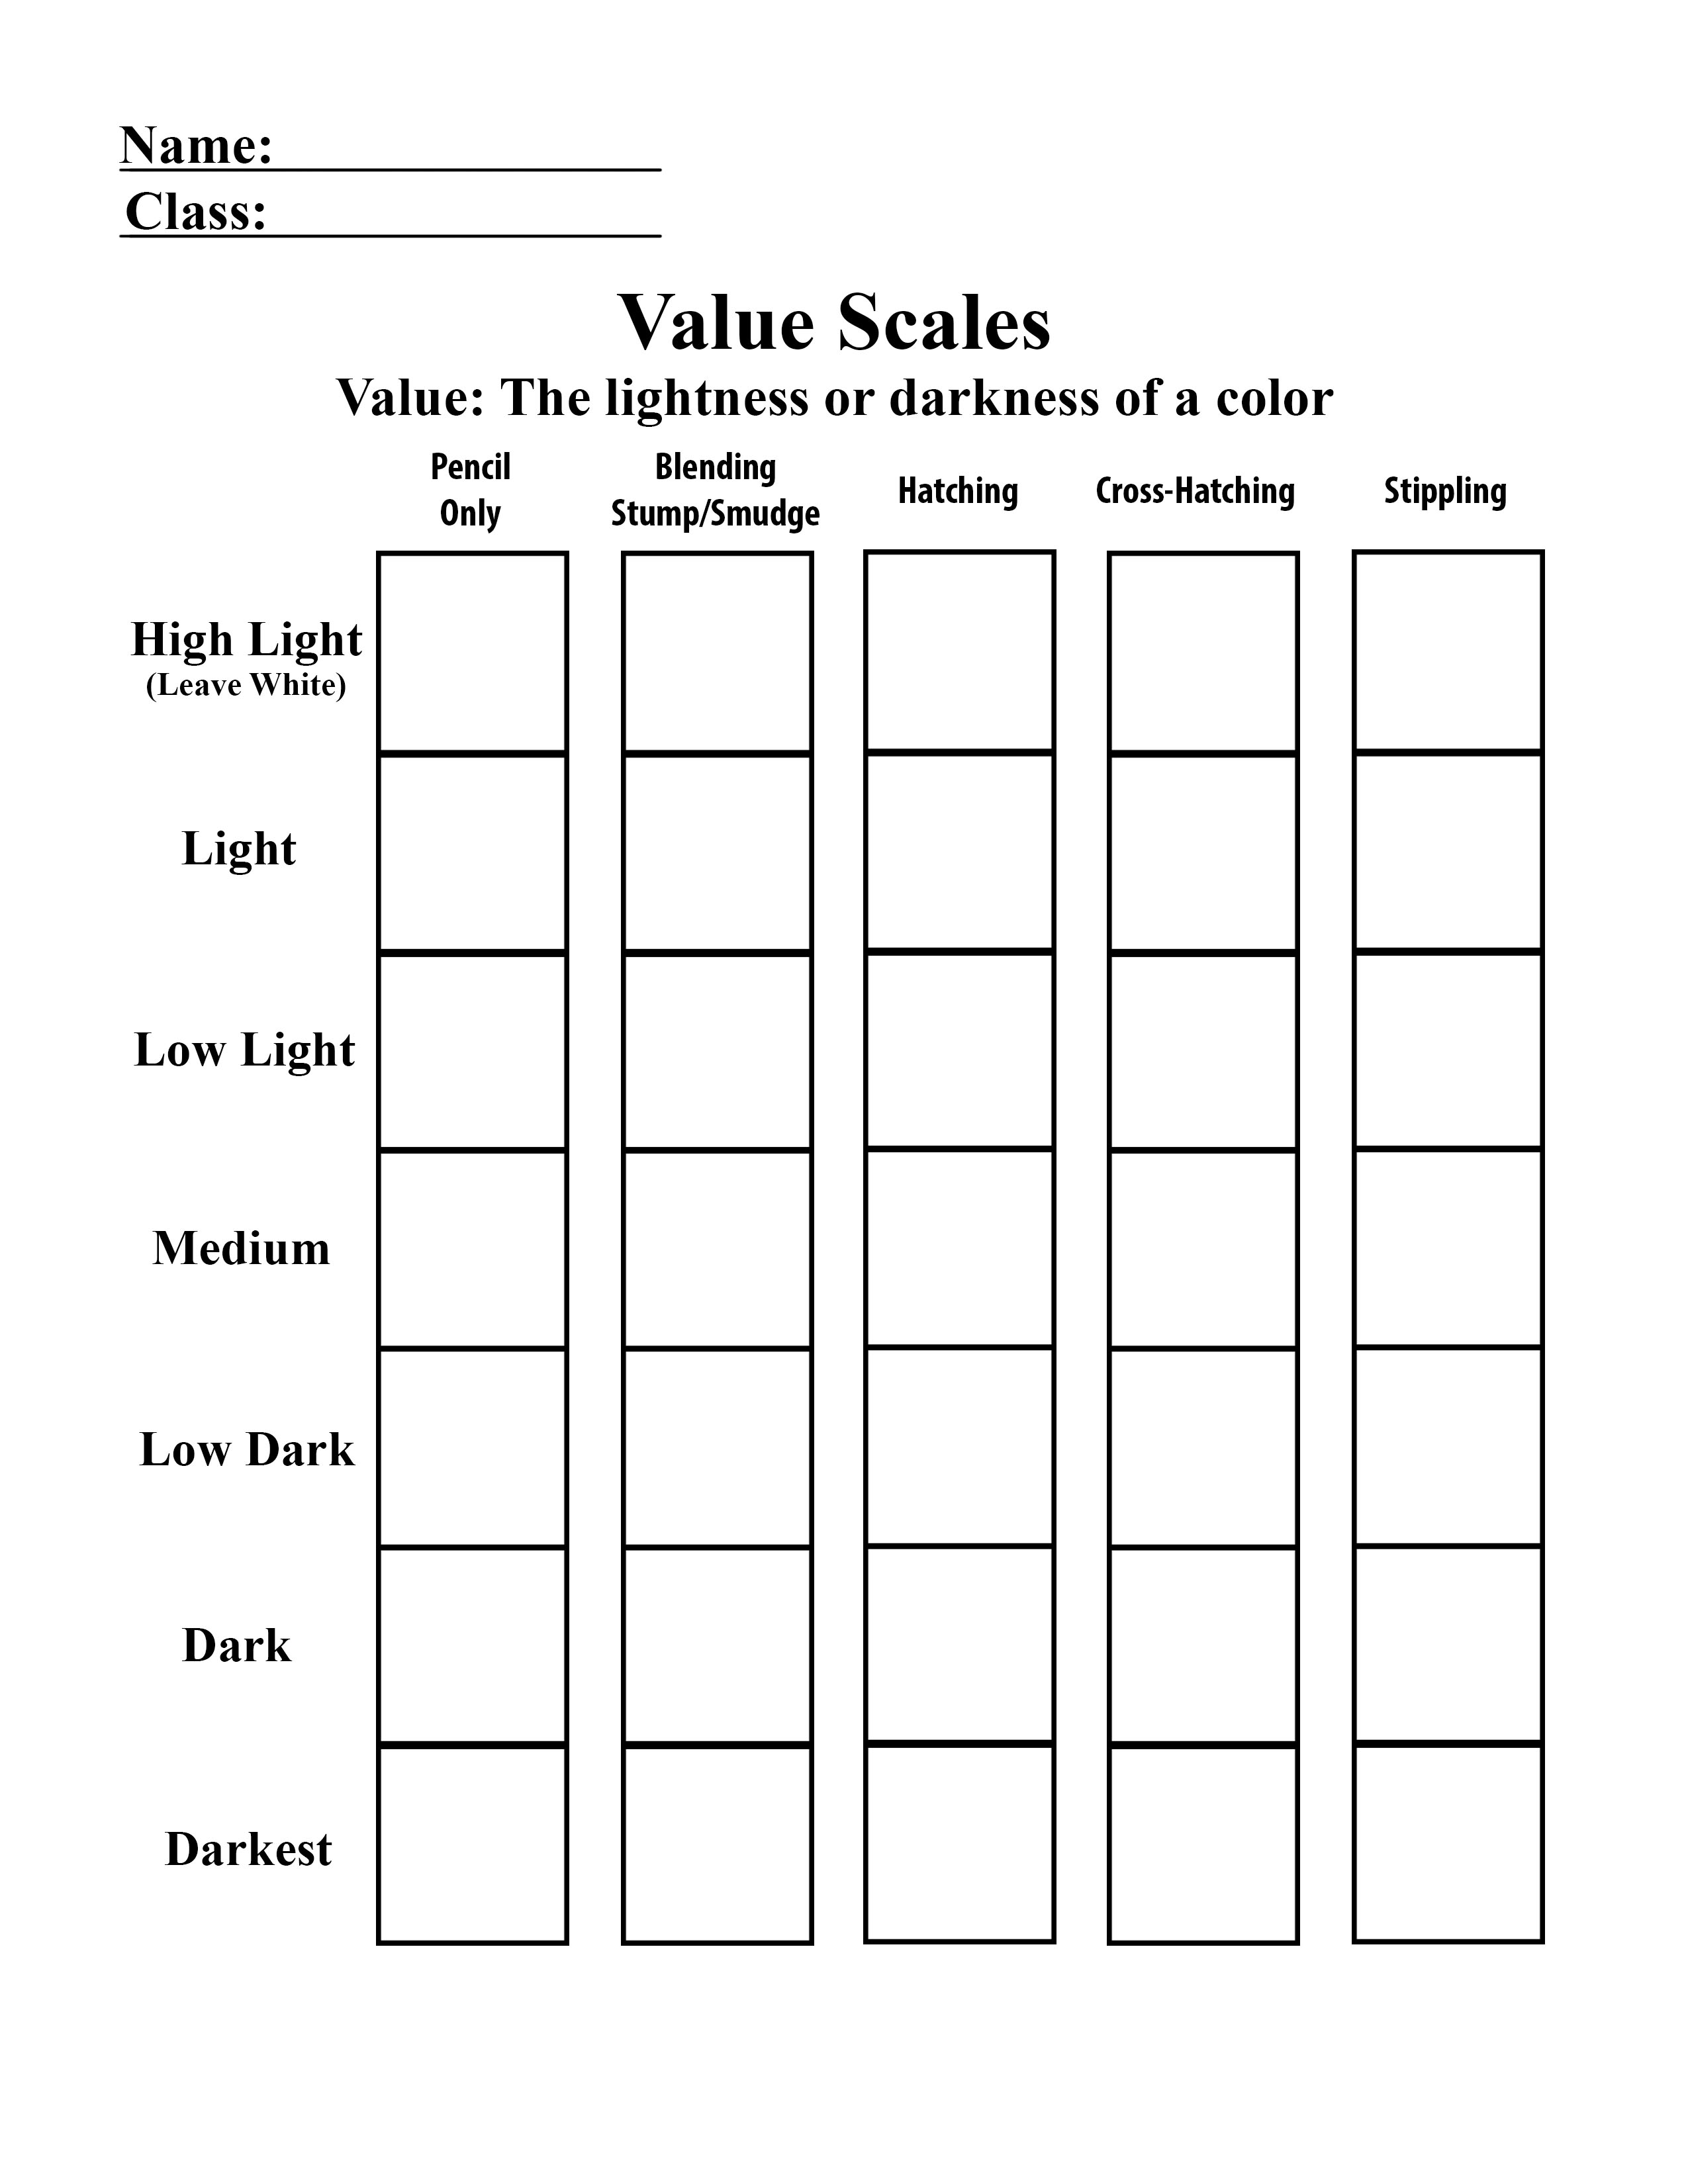 skill-wiring-value-scale-worksheet